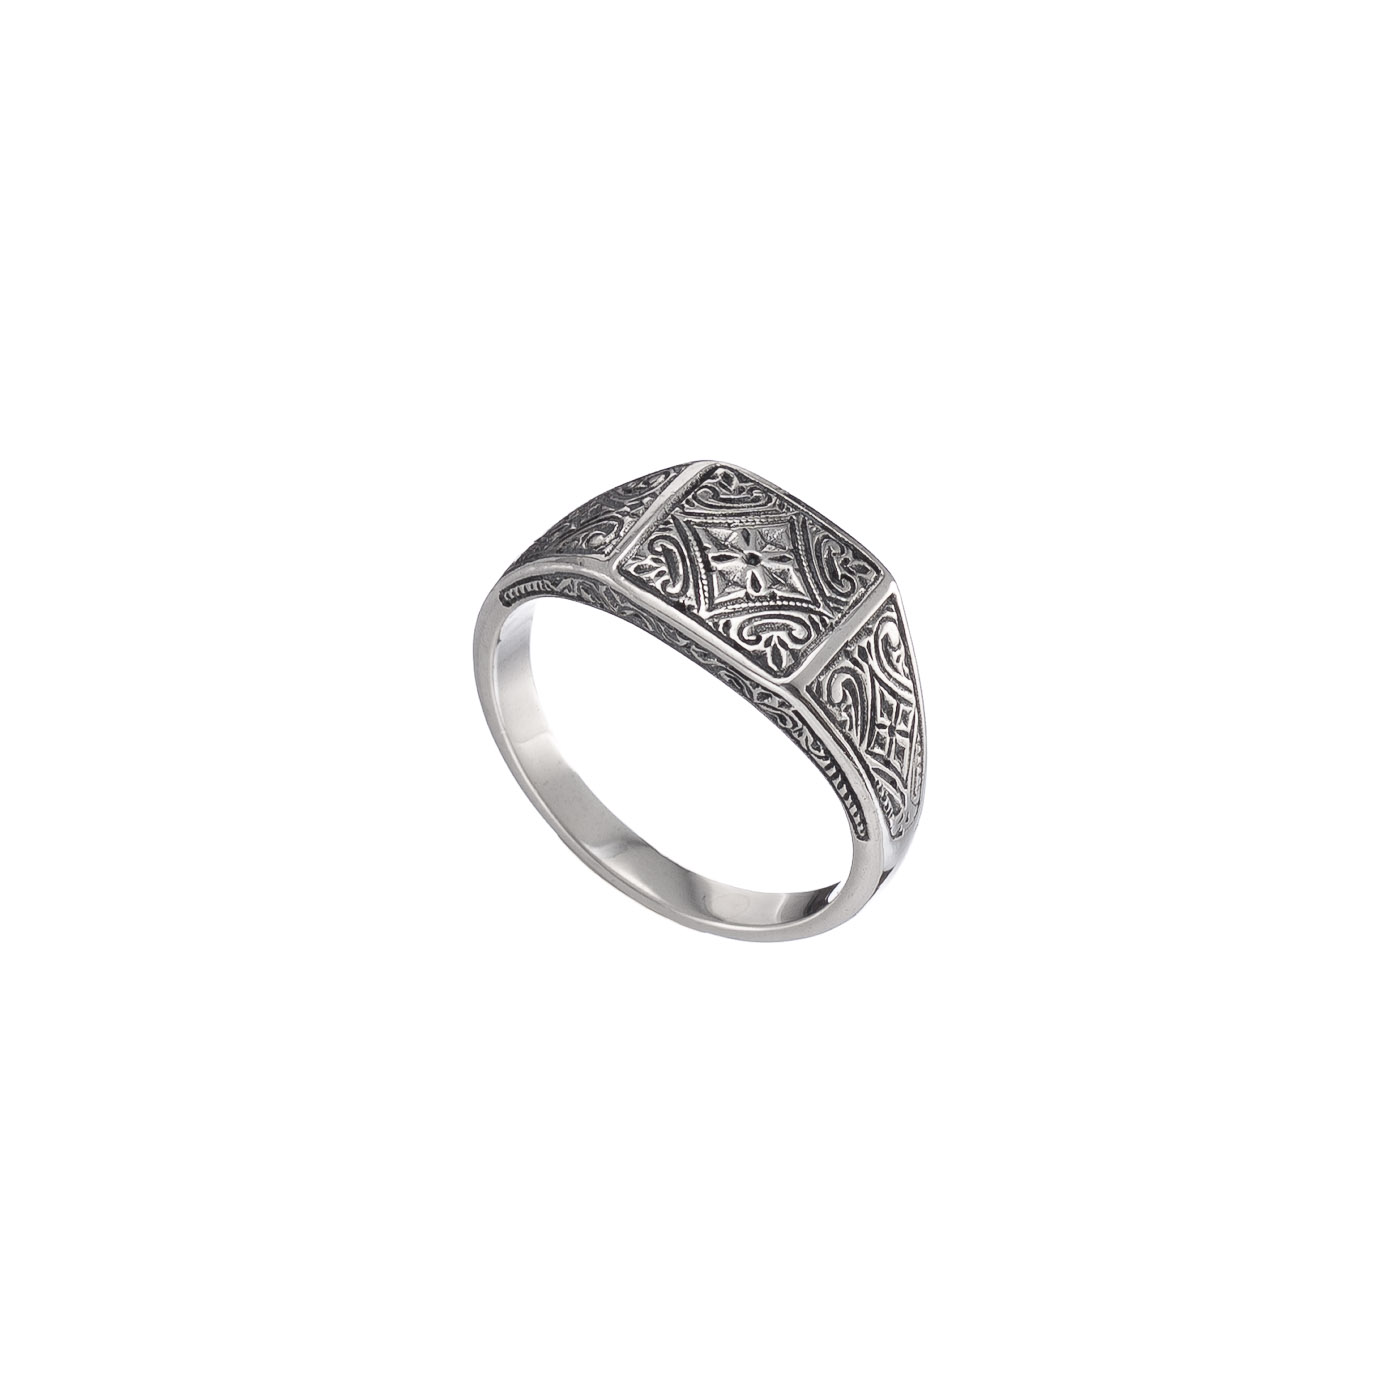 Classic pinky Ring Square shape in Sterling Silver